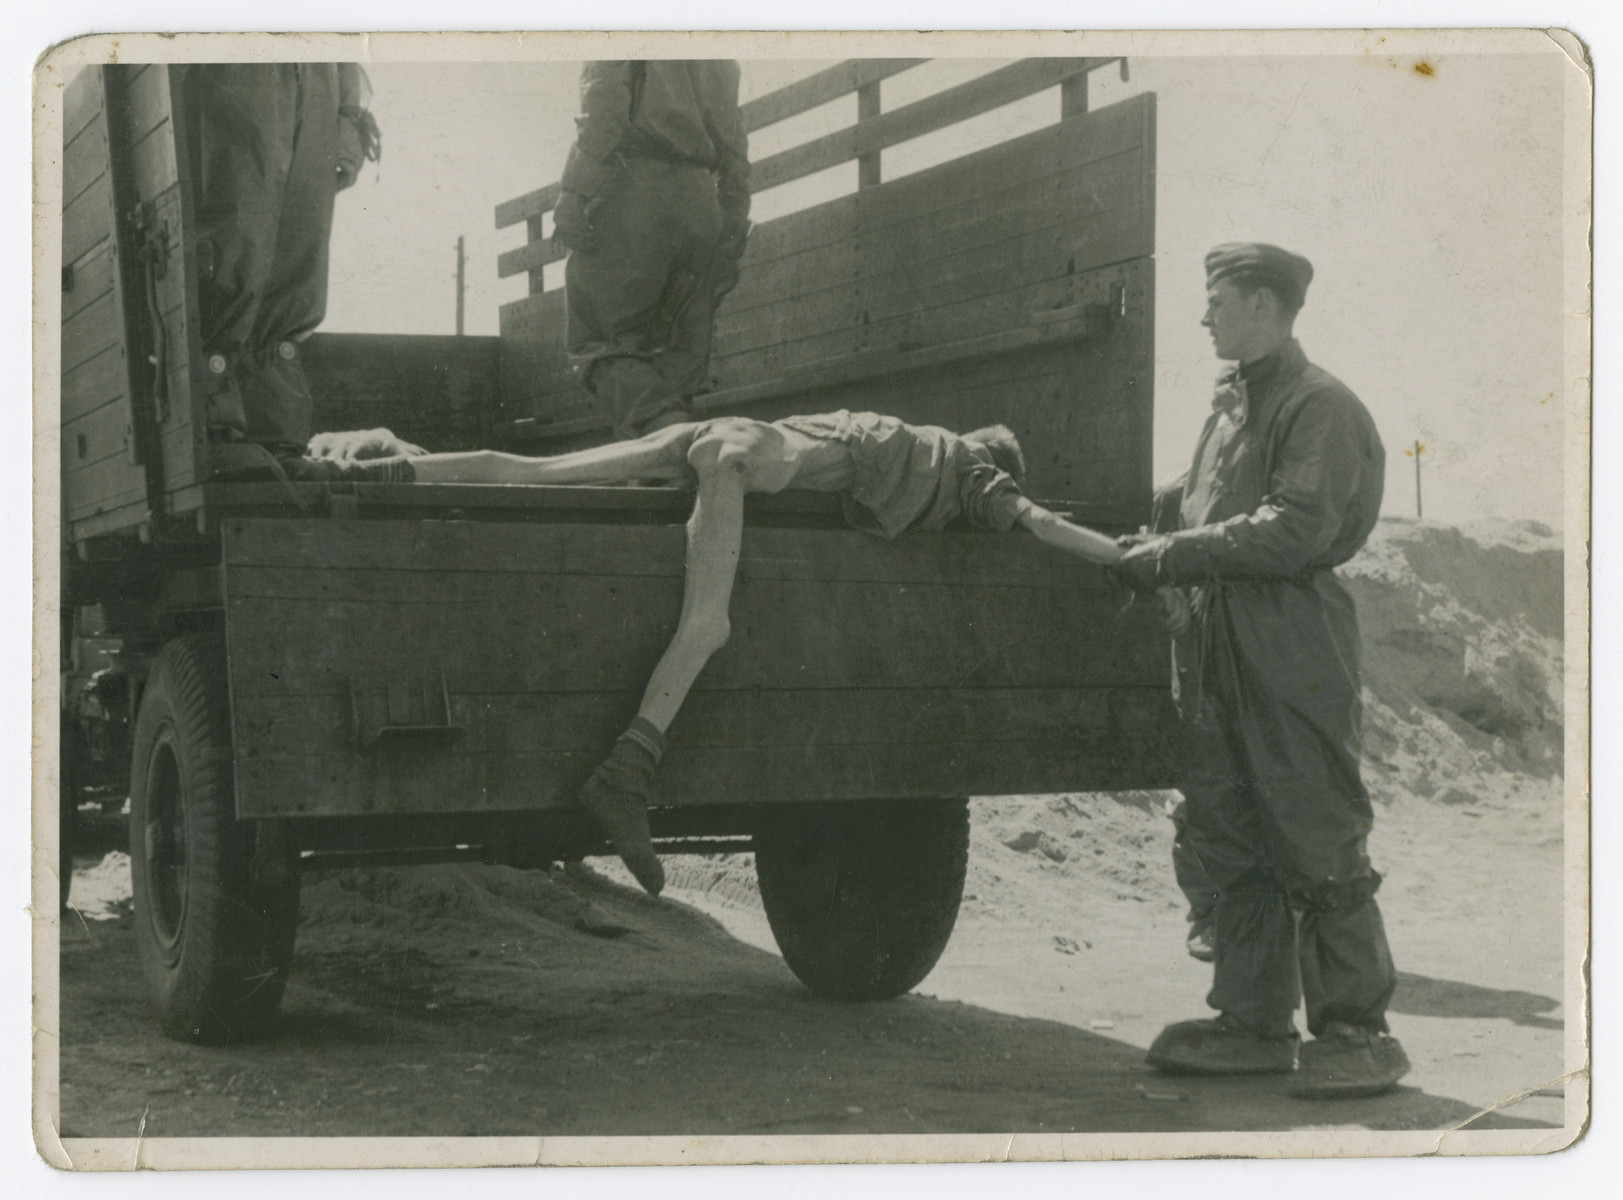 Soldiers load corpses onto trucks prior to the their burial.

The original caption reads: "Loading another bunch of stiffs in the truck for the pit in Bensen."